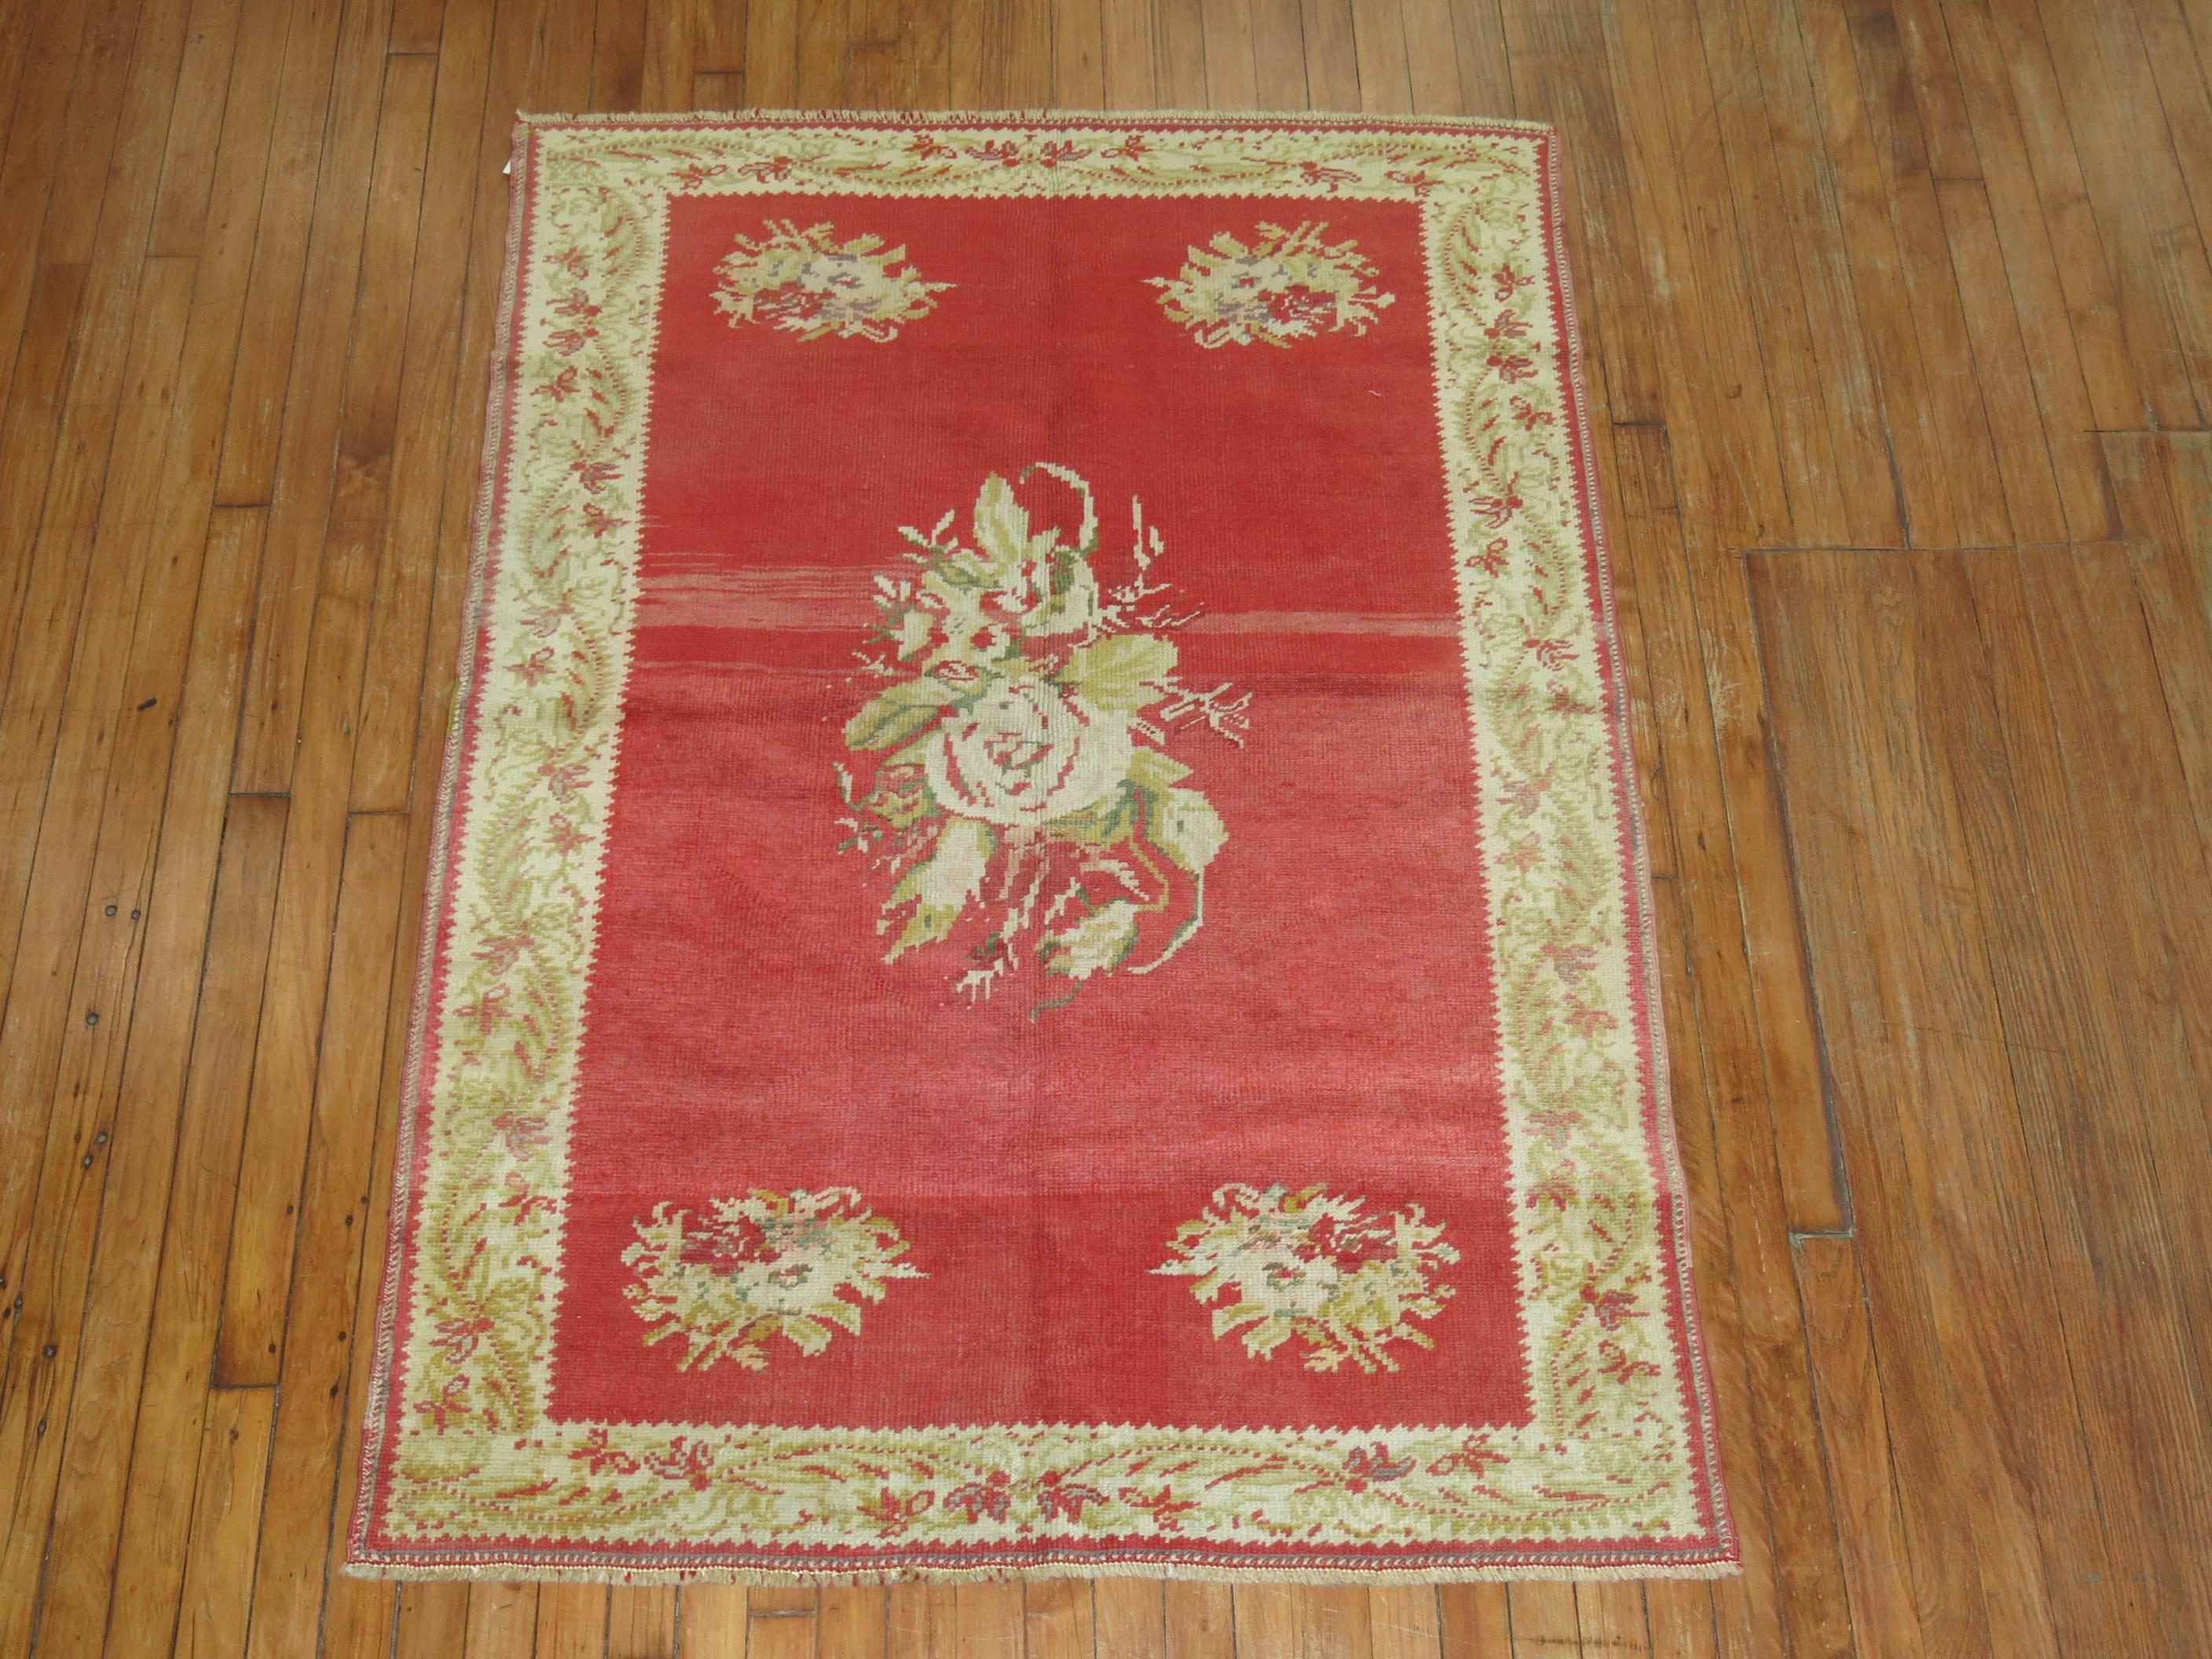 An elegant floral Turkish Ghiordes rug with flower bouquets running through a strawberry red ground and tan border. 

Measures: 3'10